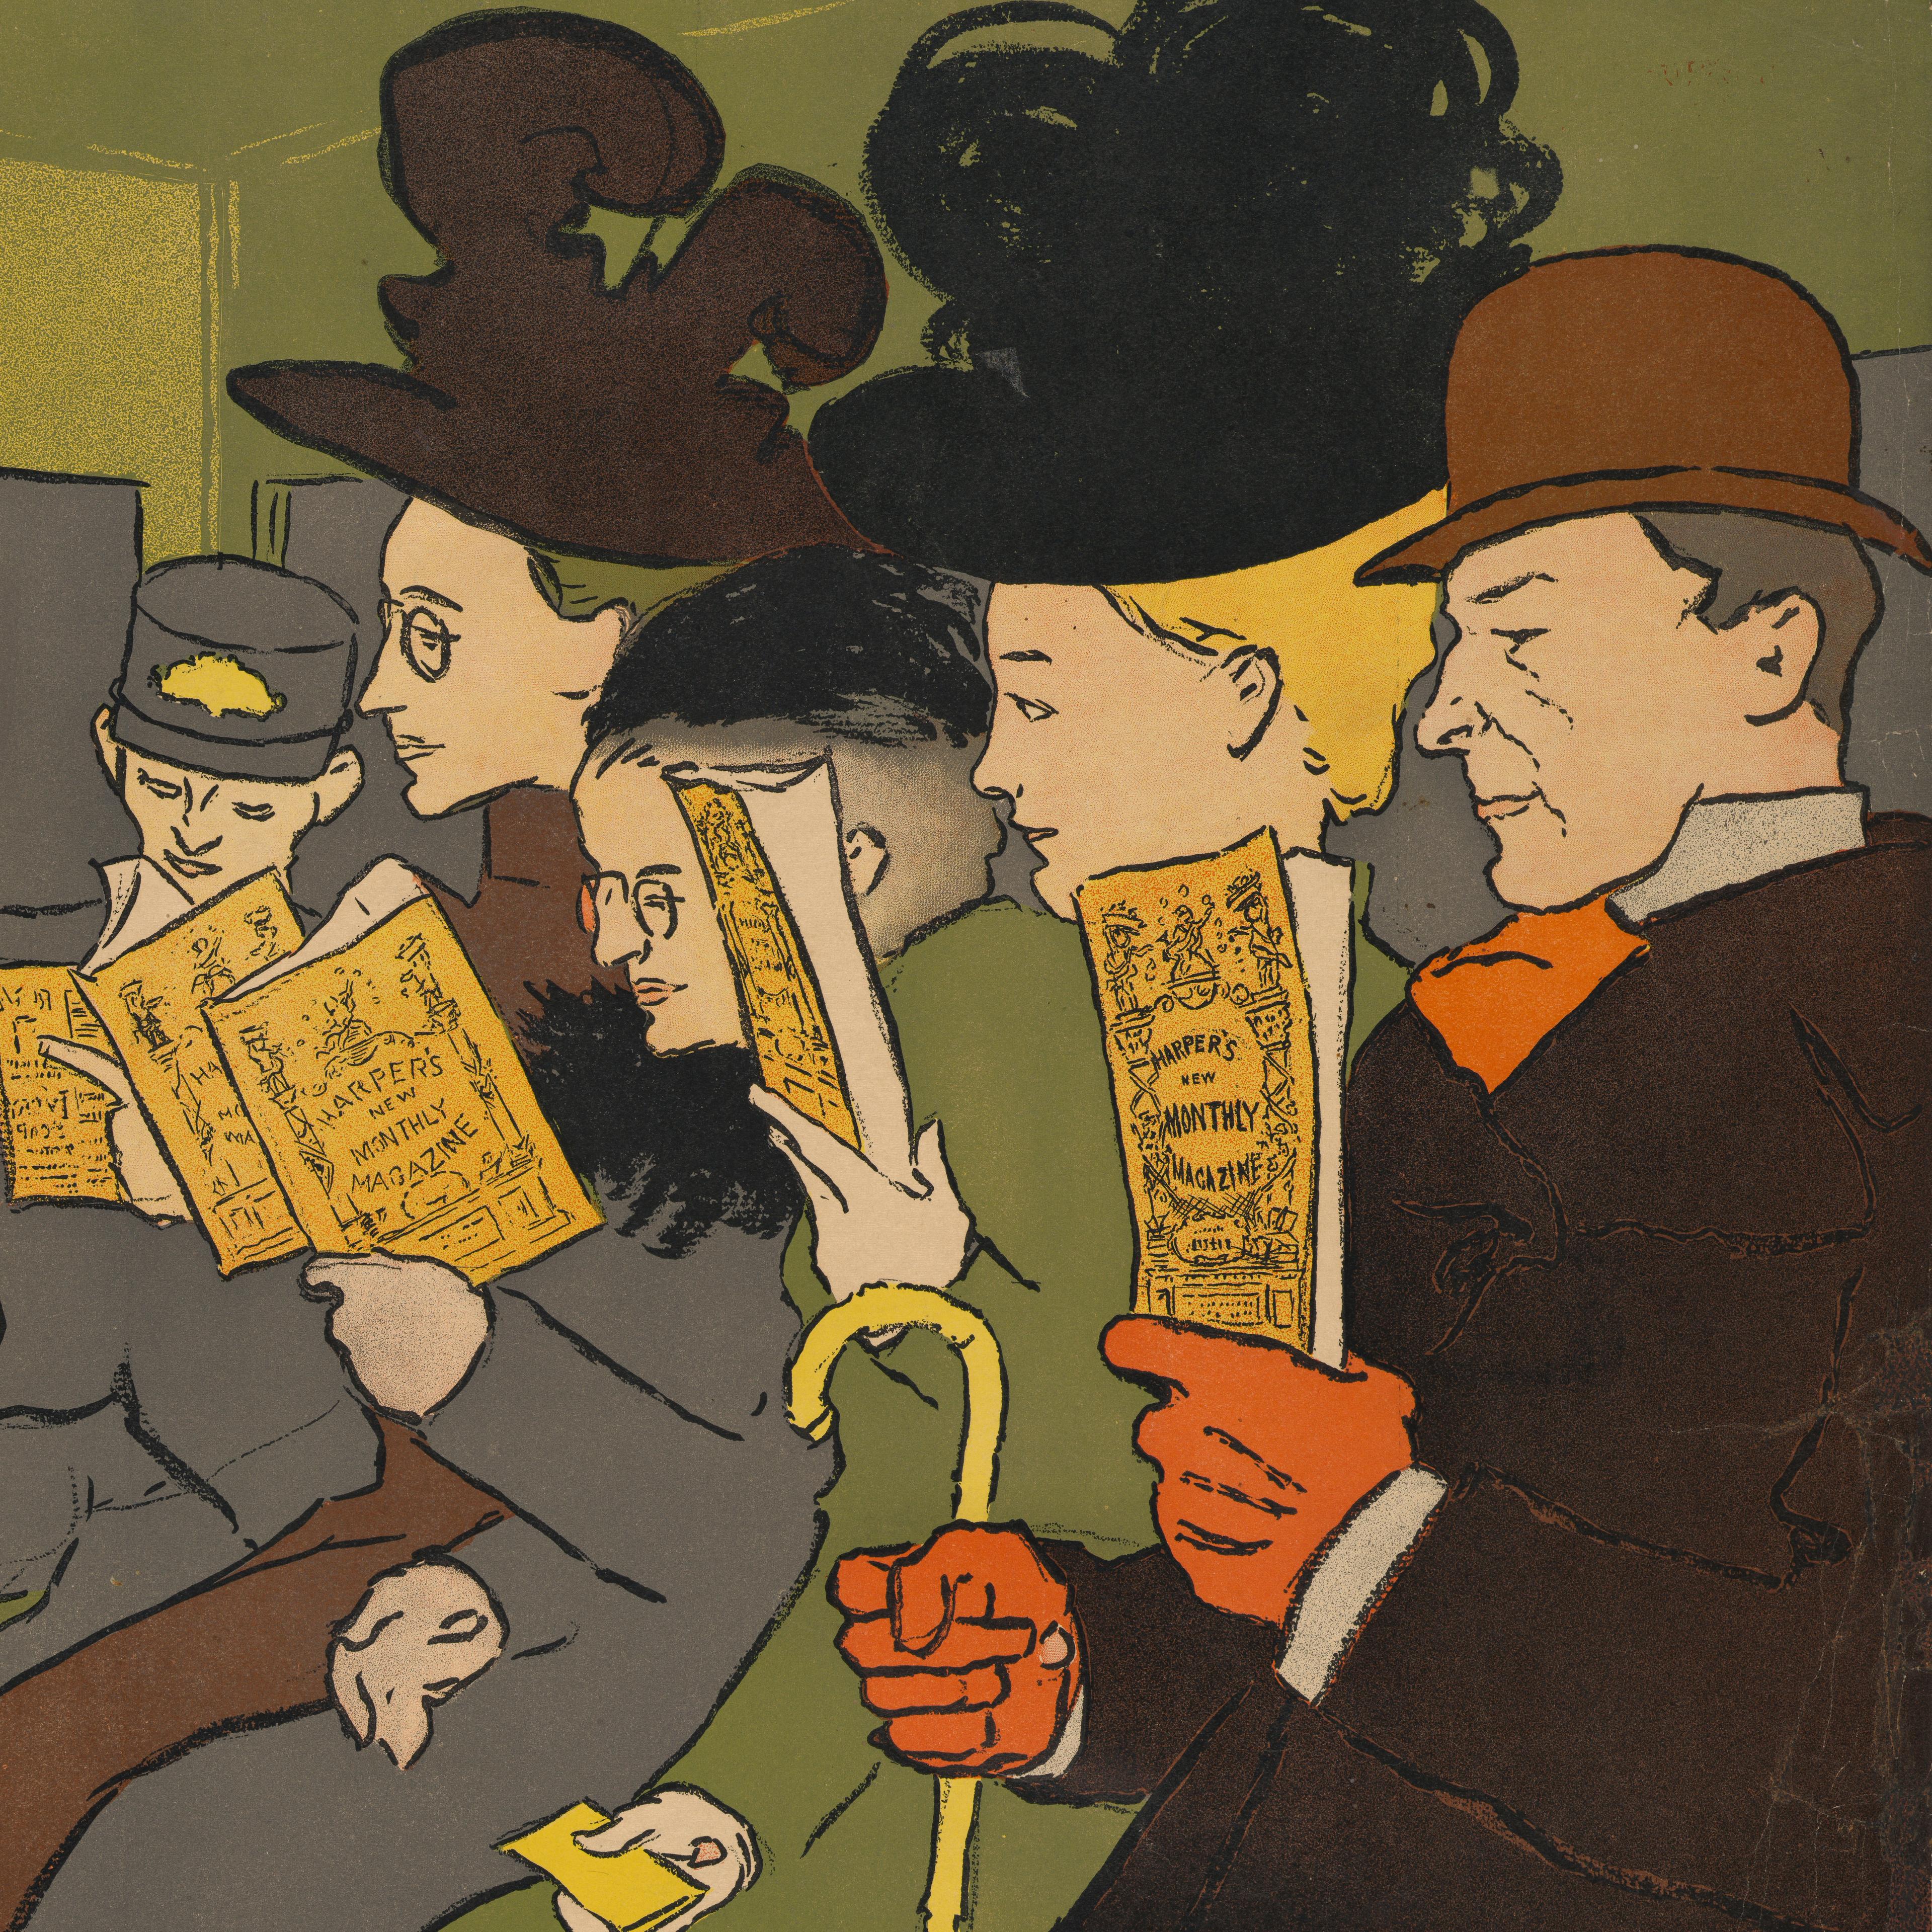 Group of people sitting reading a magazine